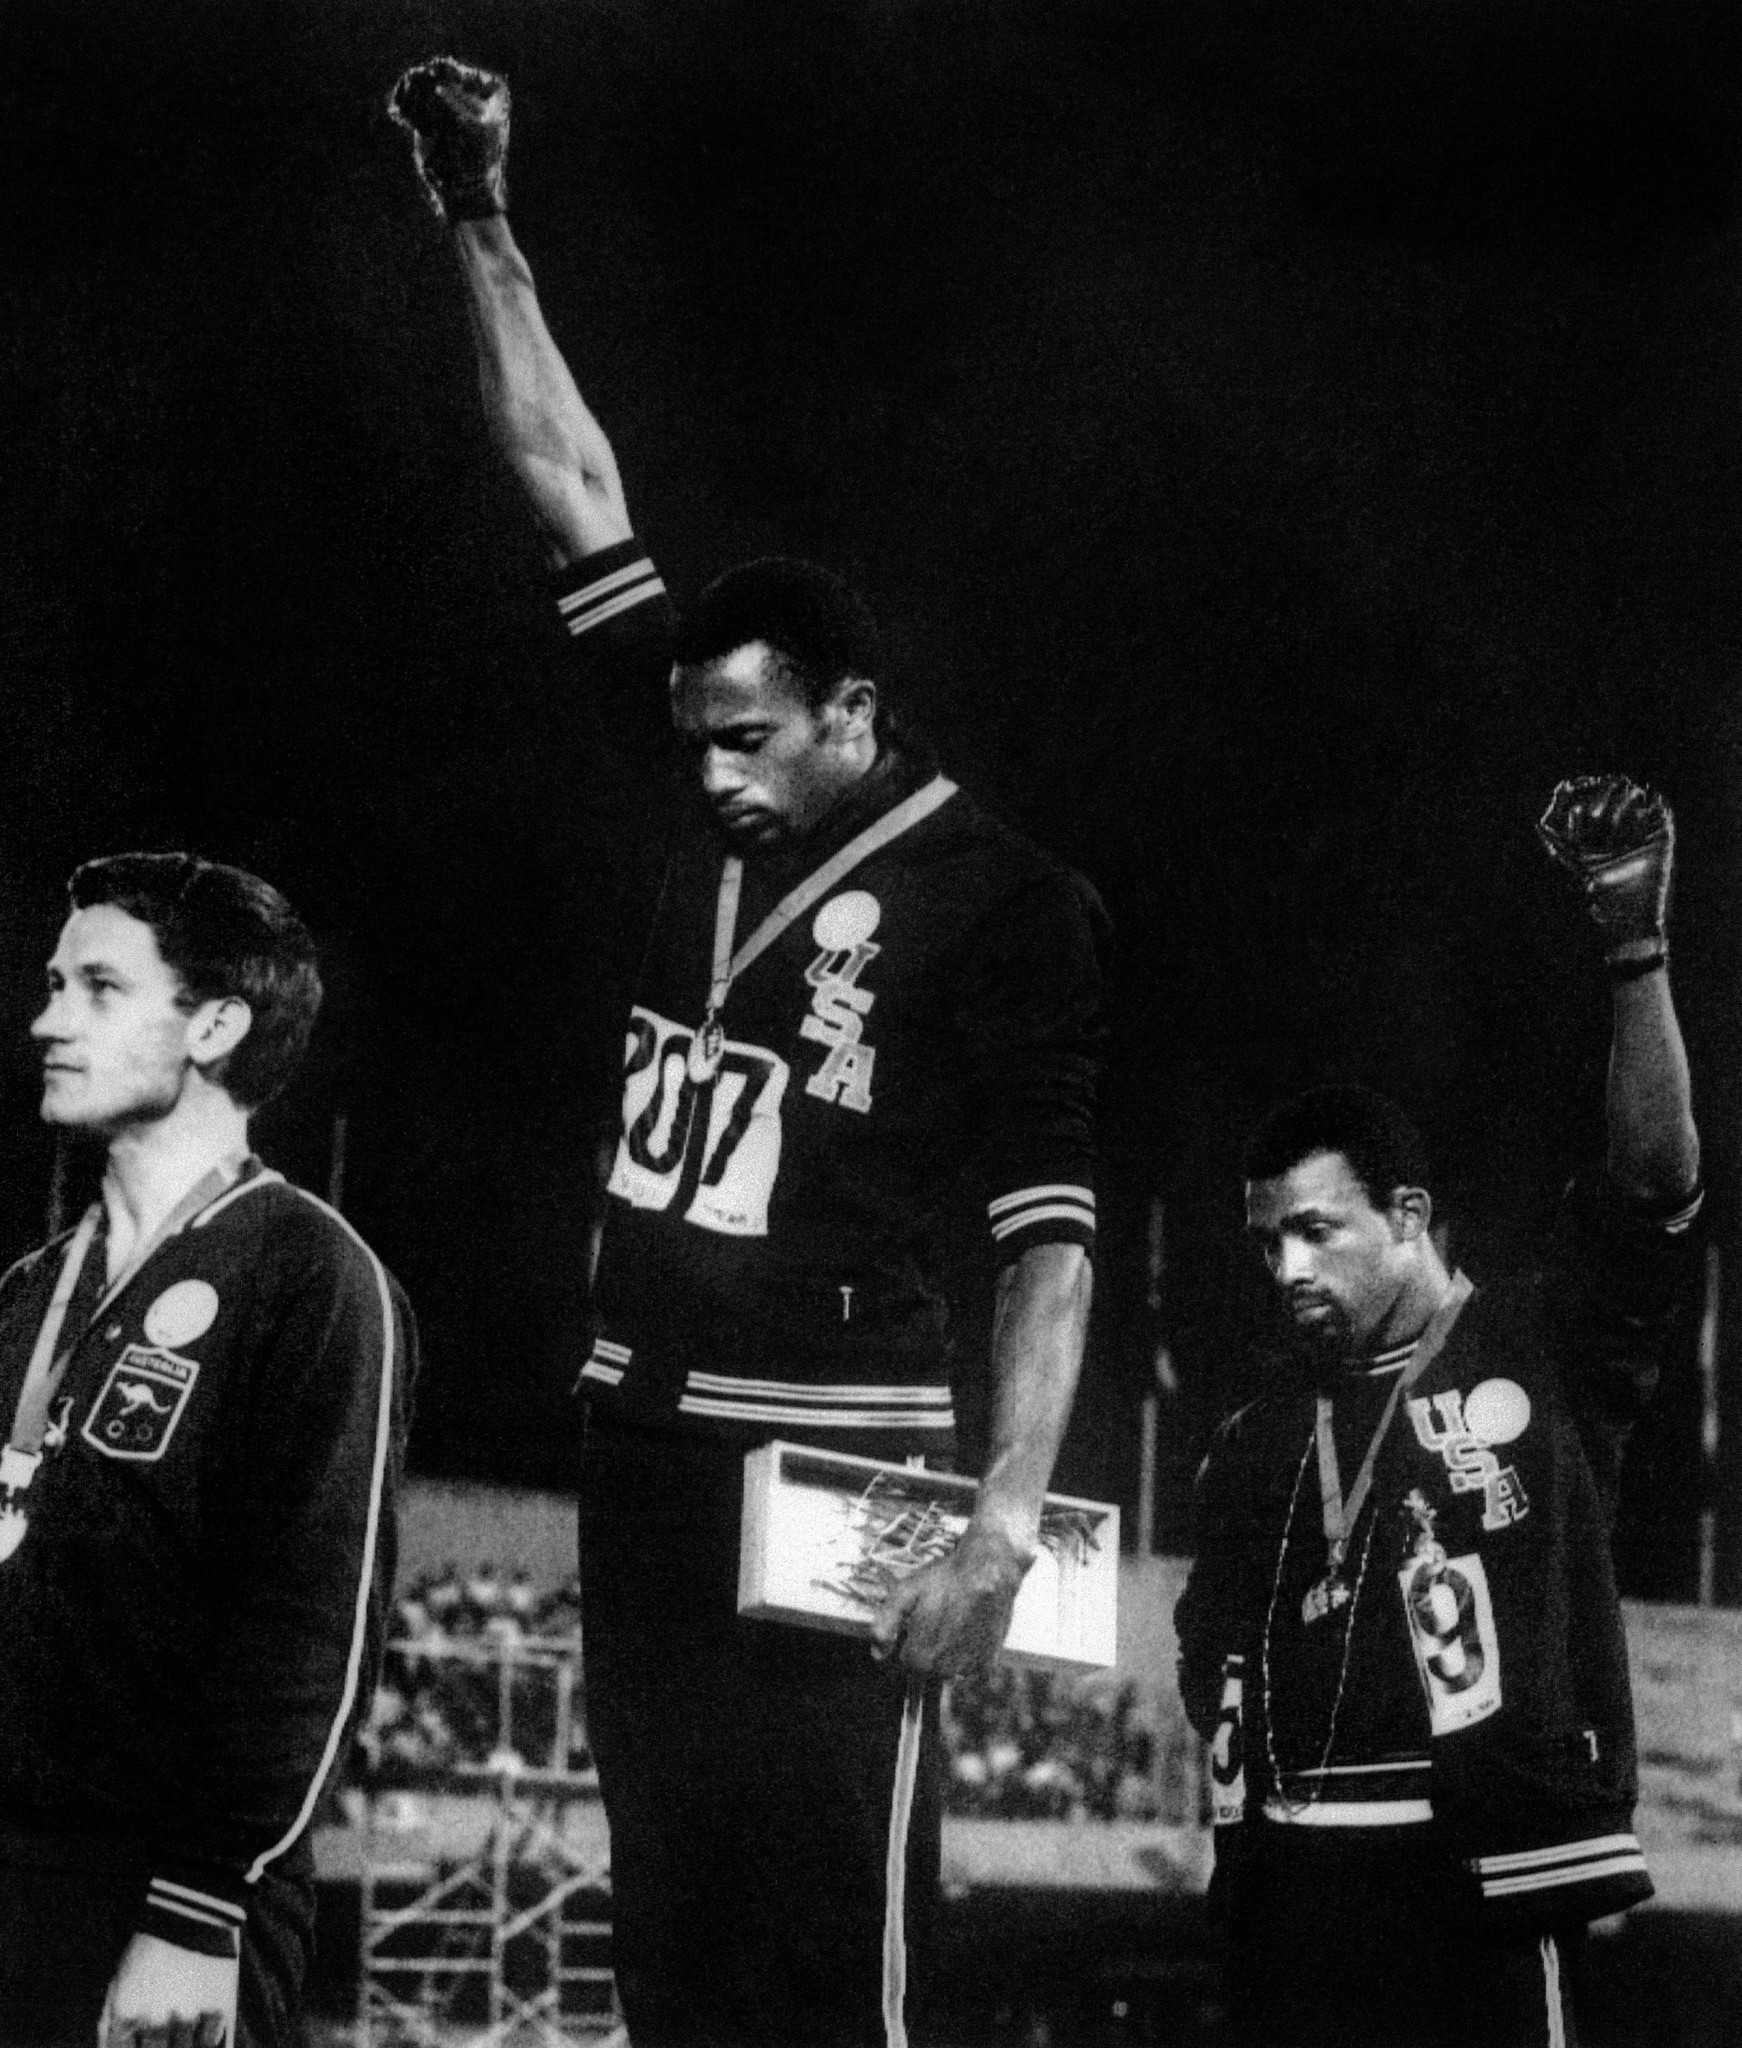 Tommie Smith and John Carlos' protest on the podium at Mexico City 1968 to complain about human rights in the United States has become an iconic moment in Olympic history ©Getty Images